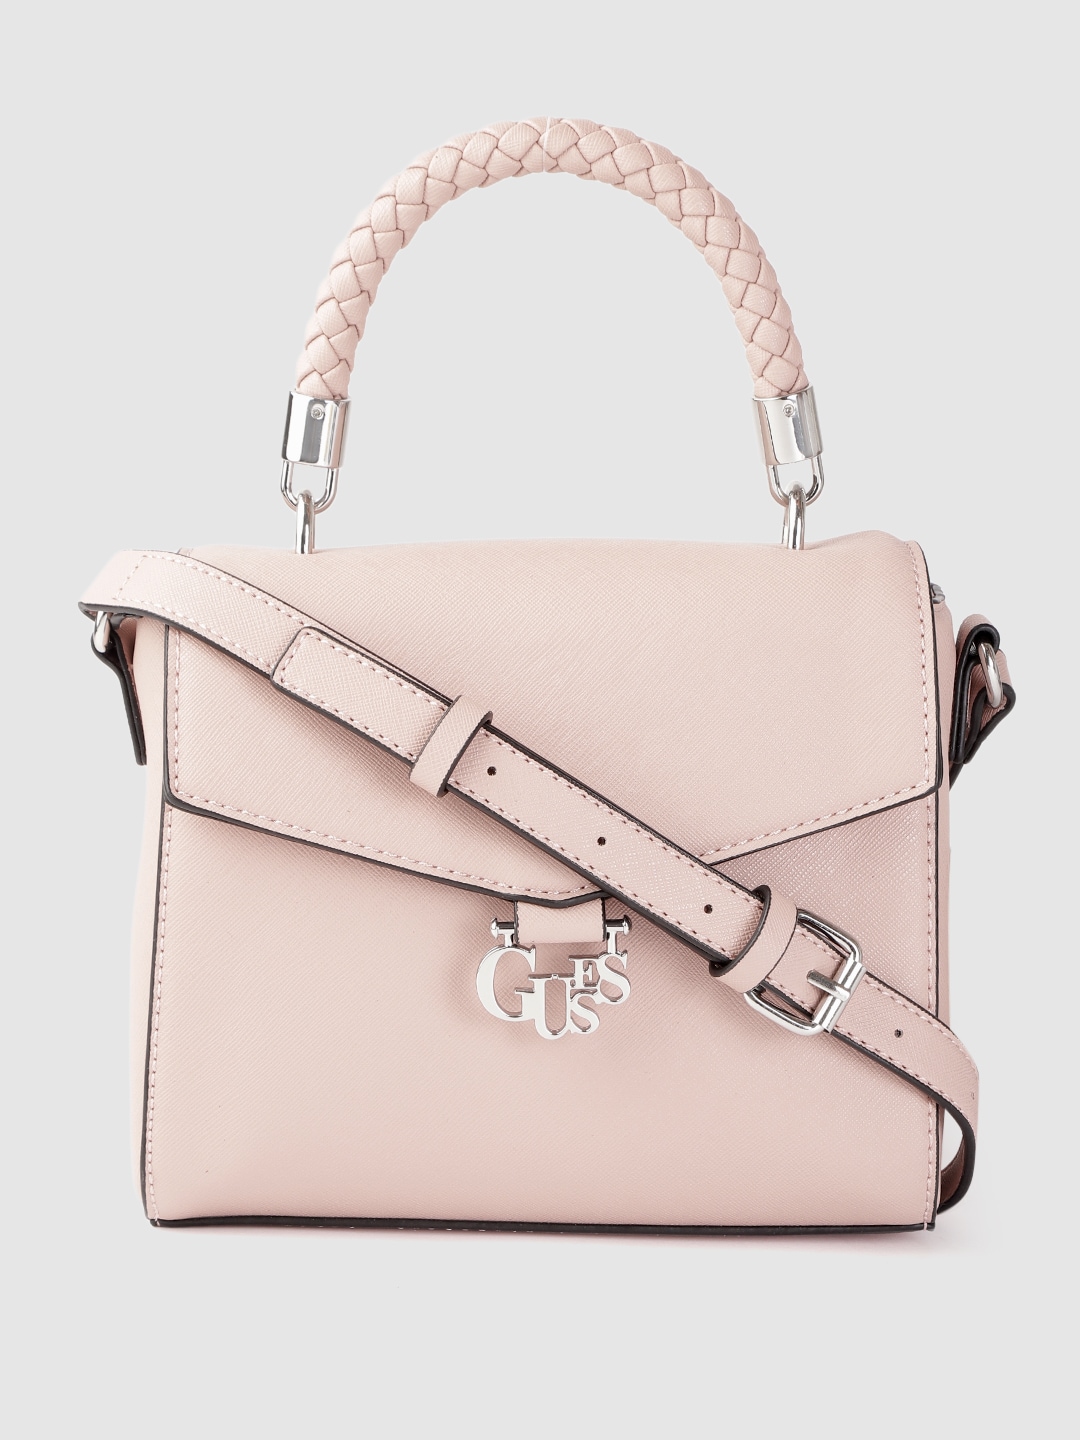 GUESS Pink Saffinao Textured Structured Satchel with Detachable Sling Strap Price in India